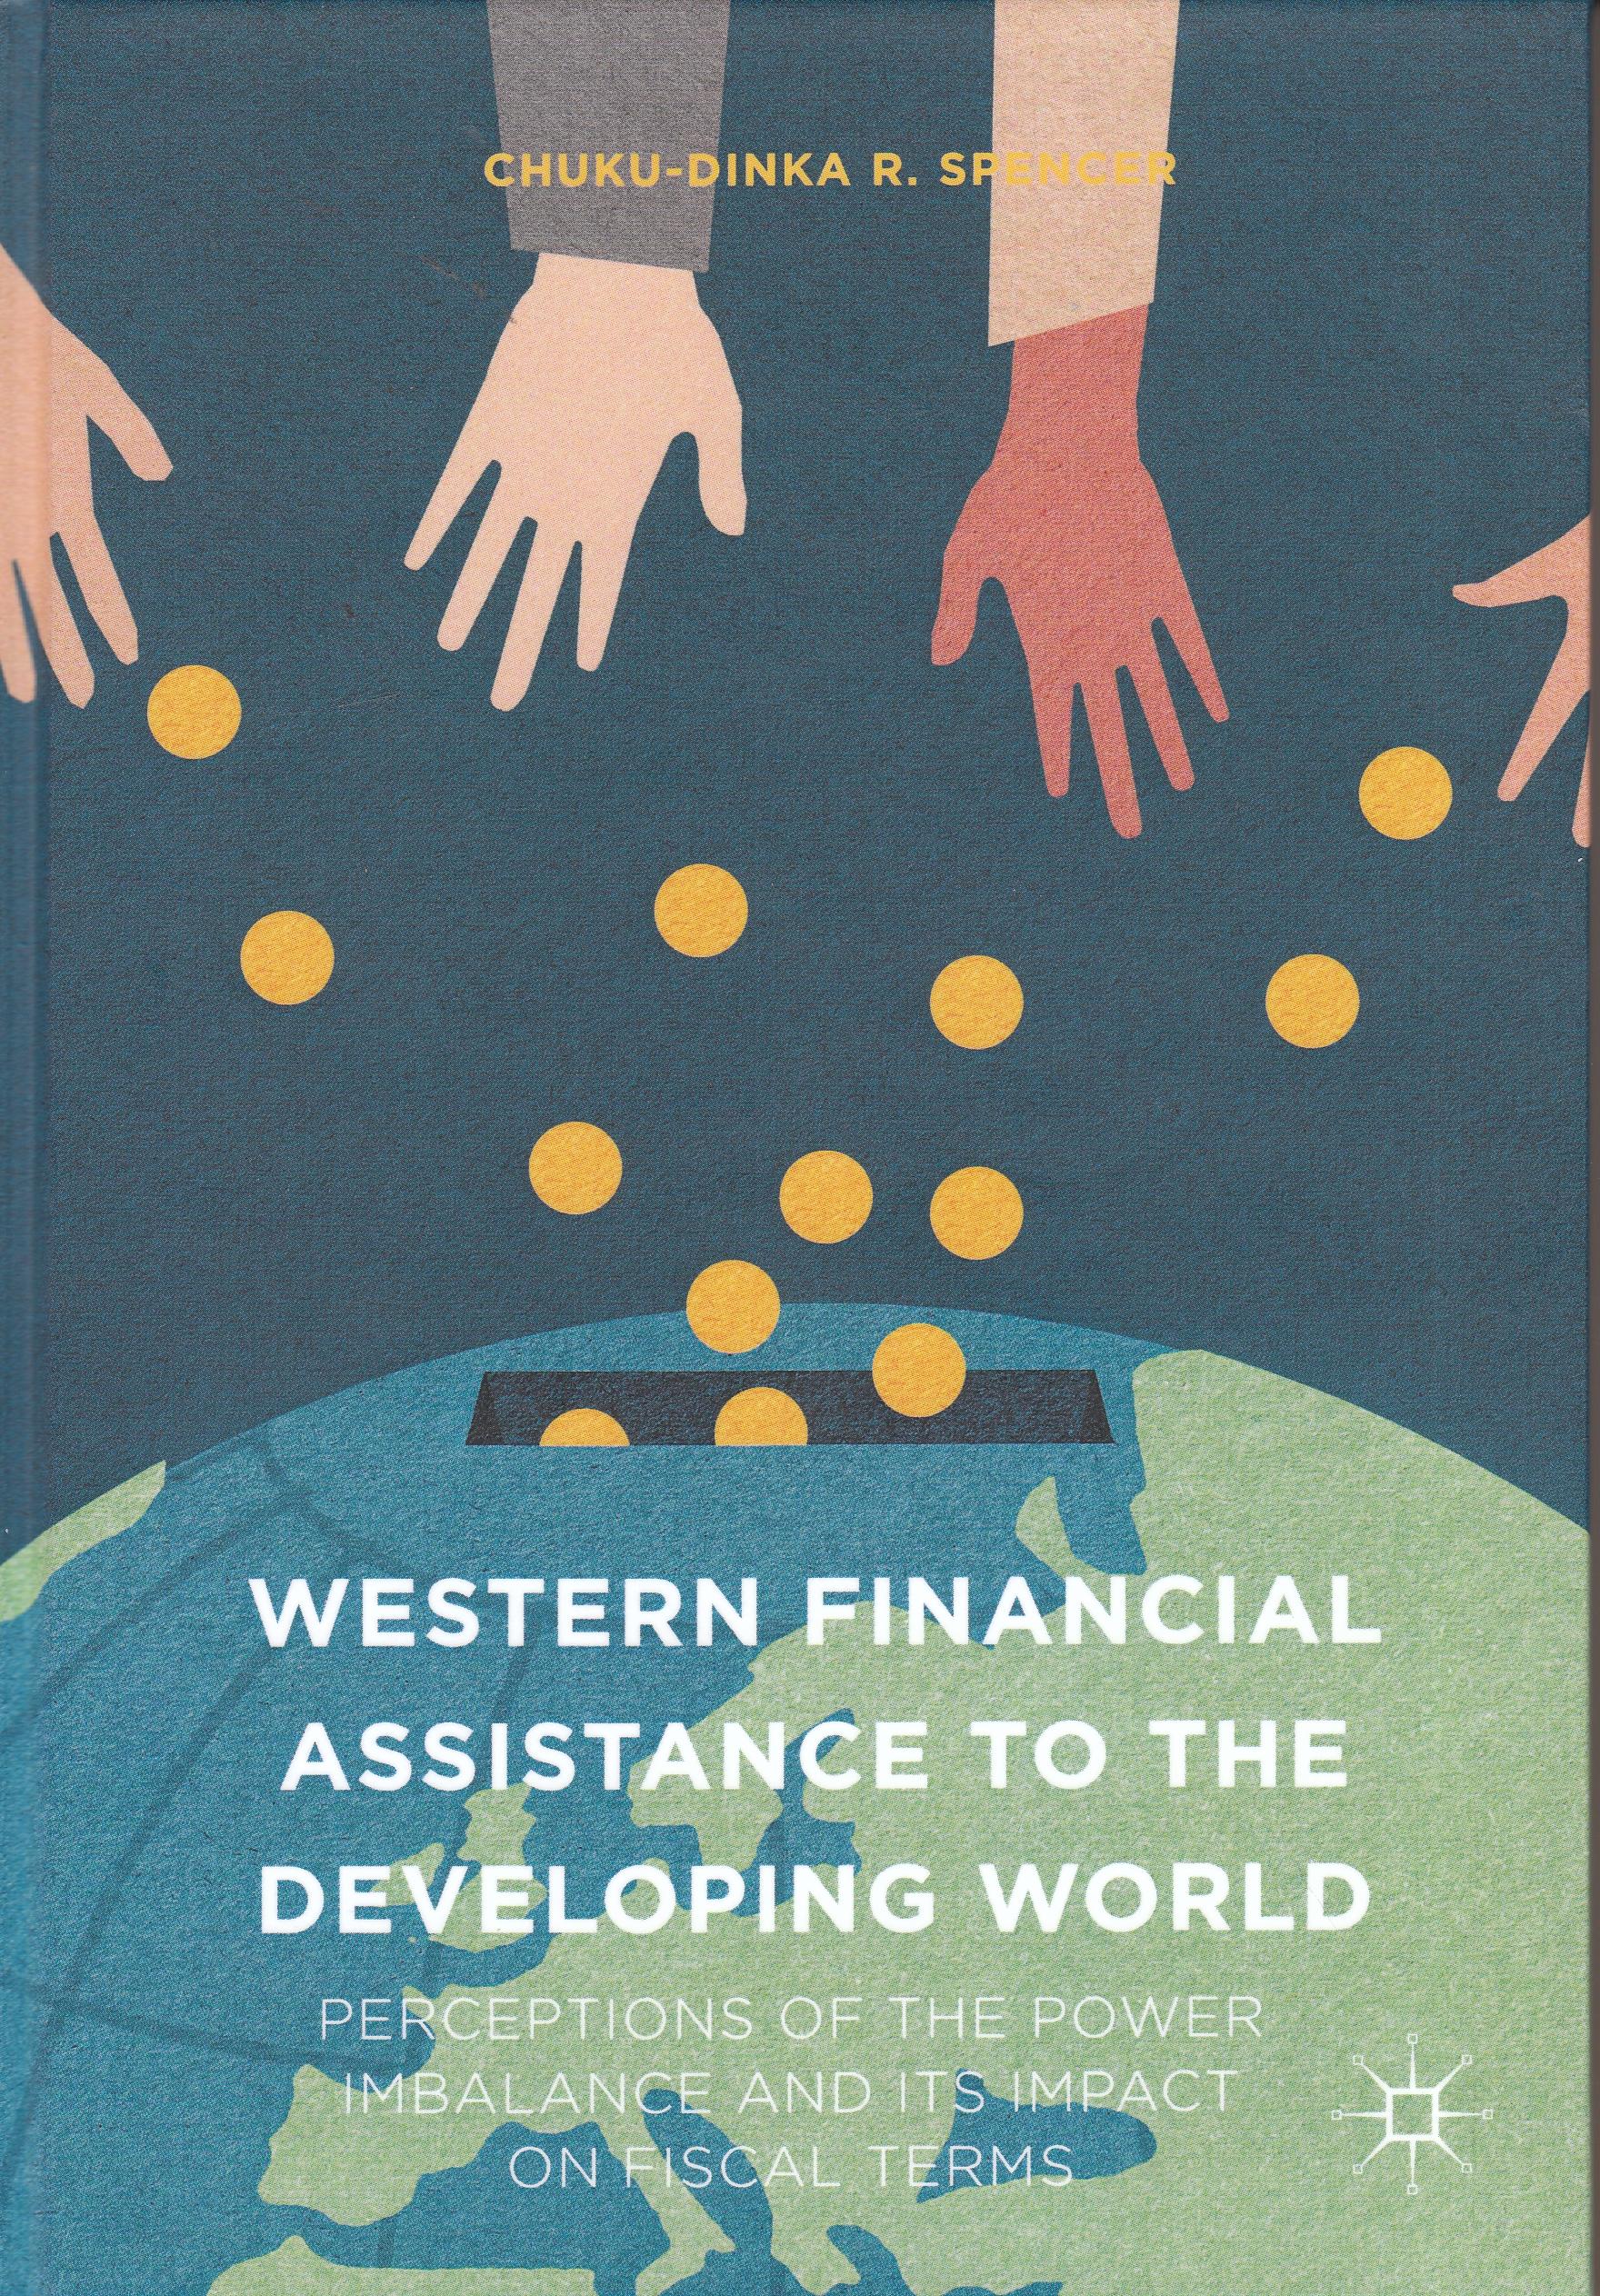 Western Financial Assistance to the Developing World "Perceptions of the Power Imbalance and its Impact on Fiscal Terms"